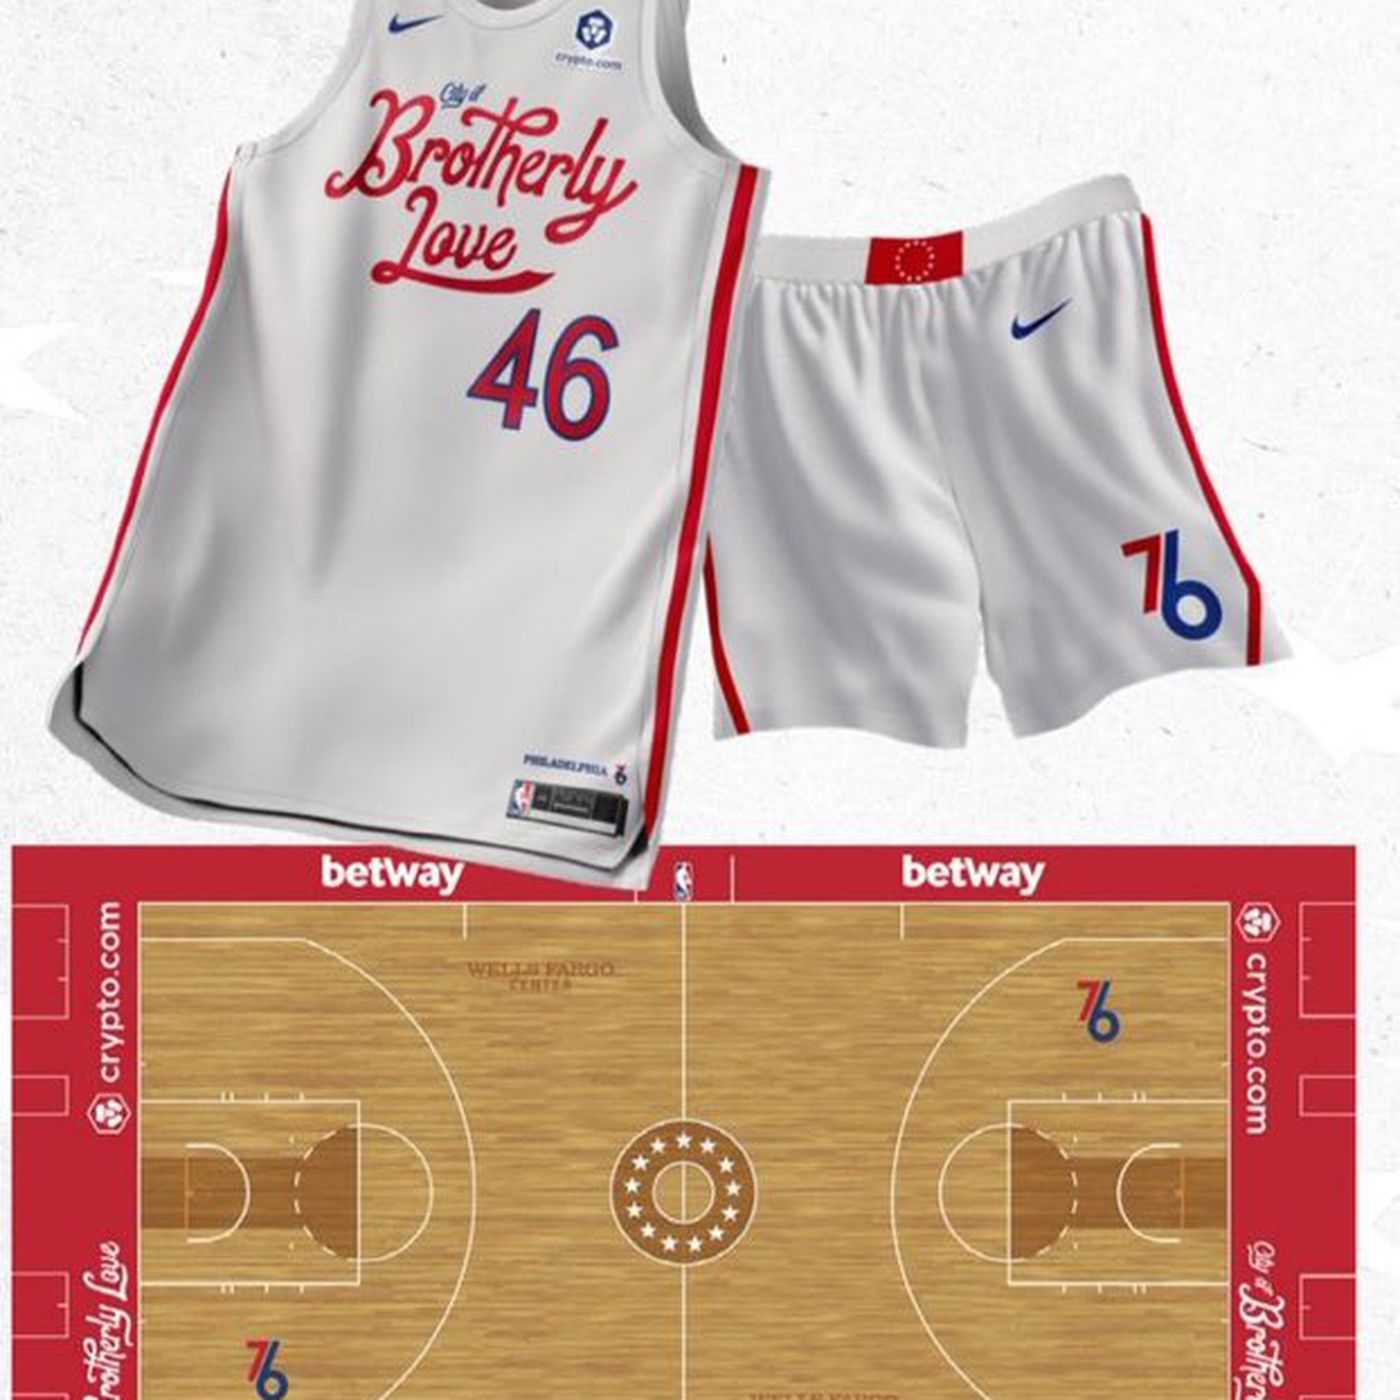 Sixers new City Edition jerseys appear to have leaked - Liberty